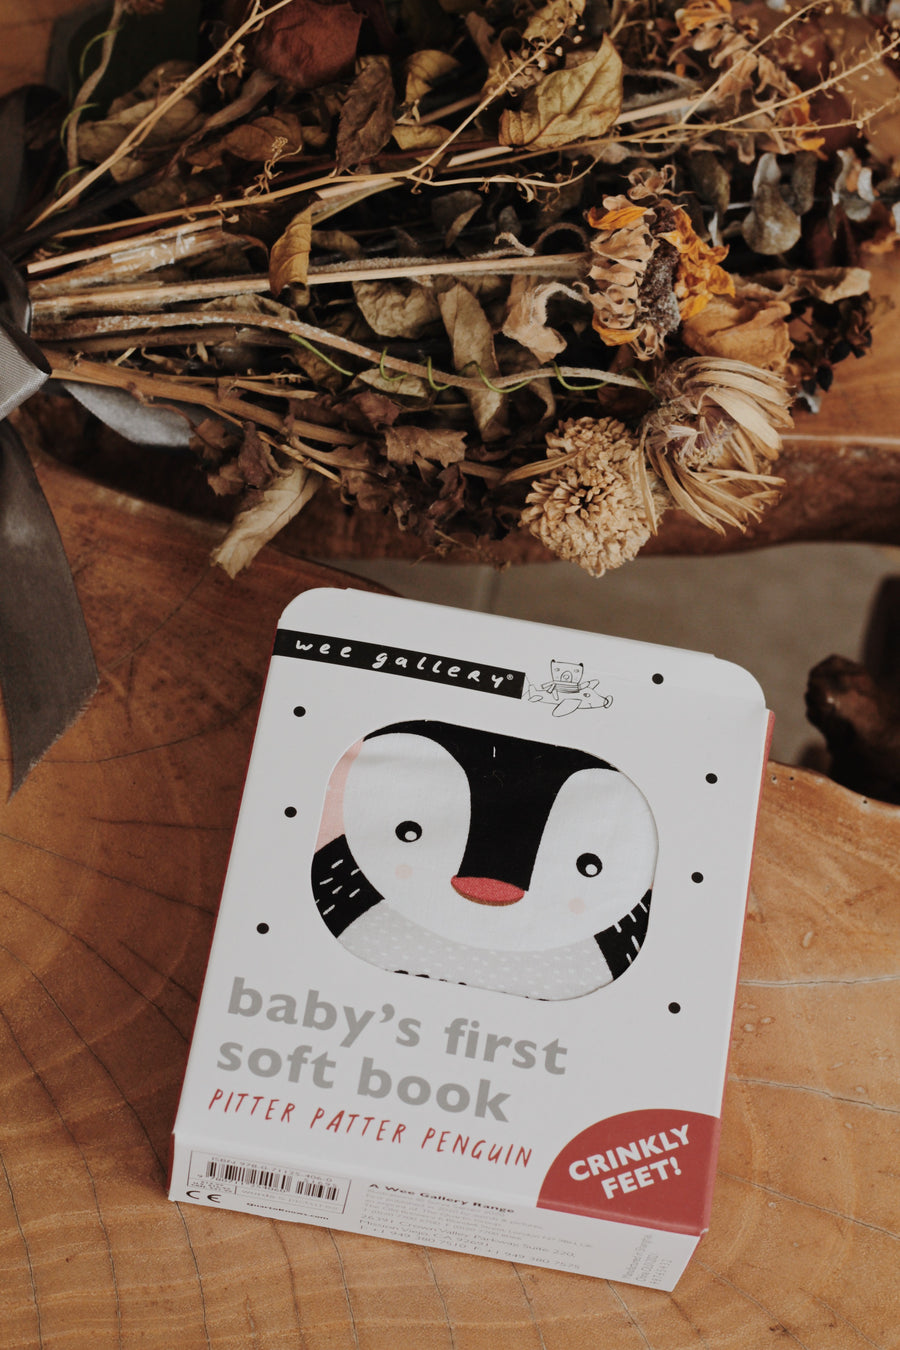 Wee Gallery: Baby's First Soft Books